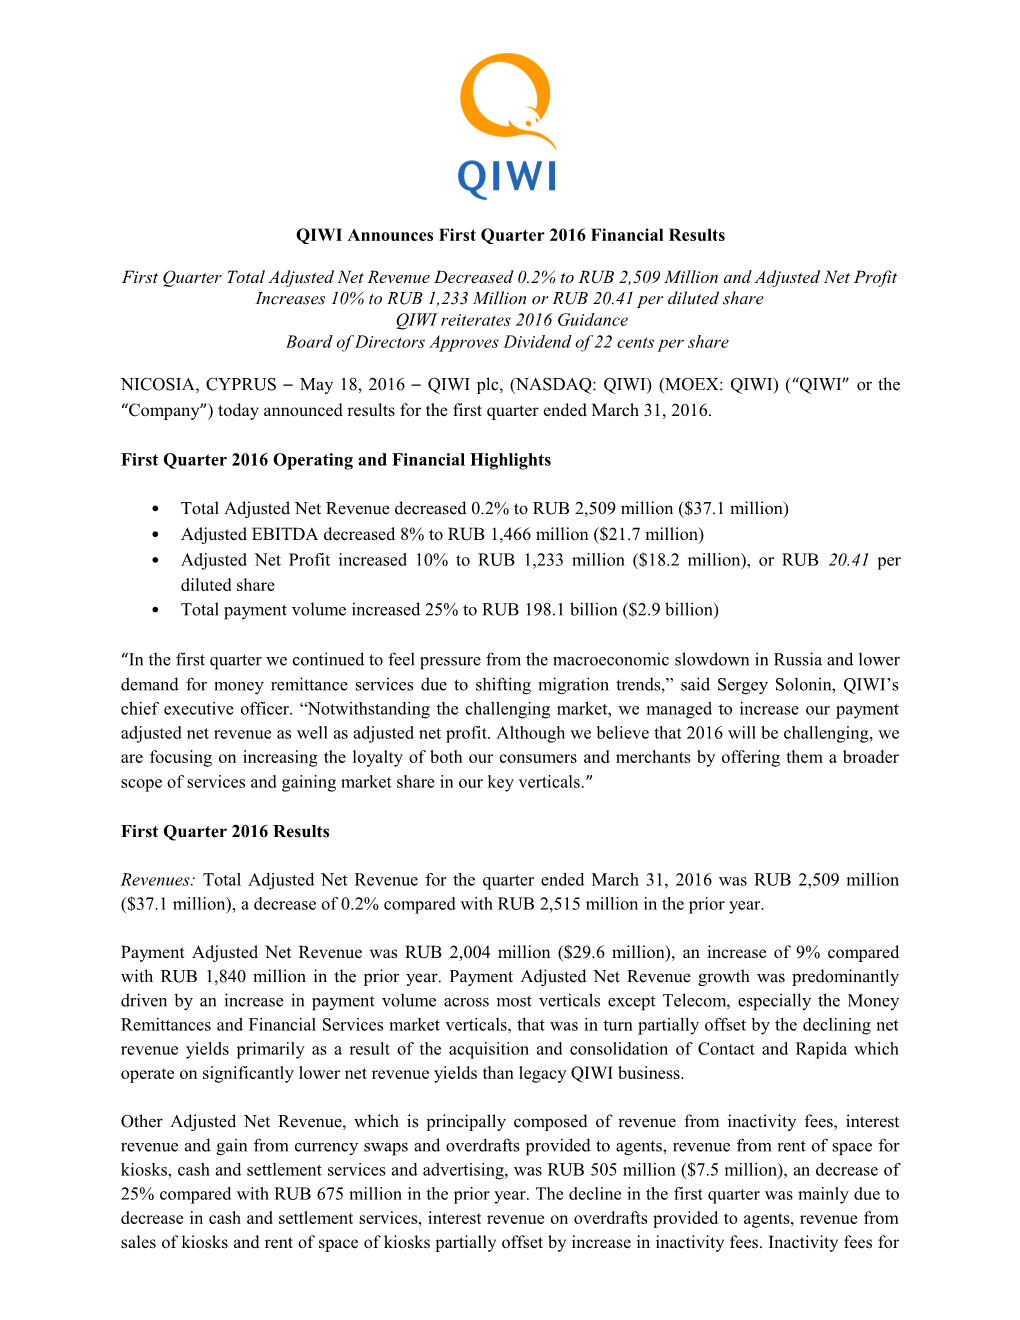 QIWI Announces First Quarter 2016 Financial Results